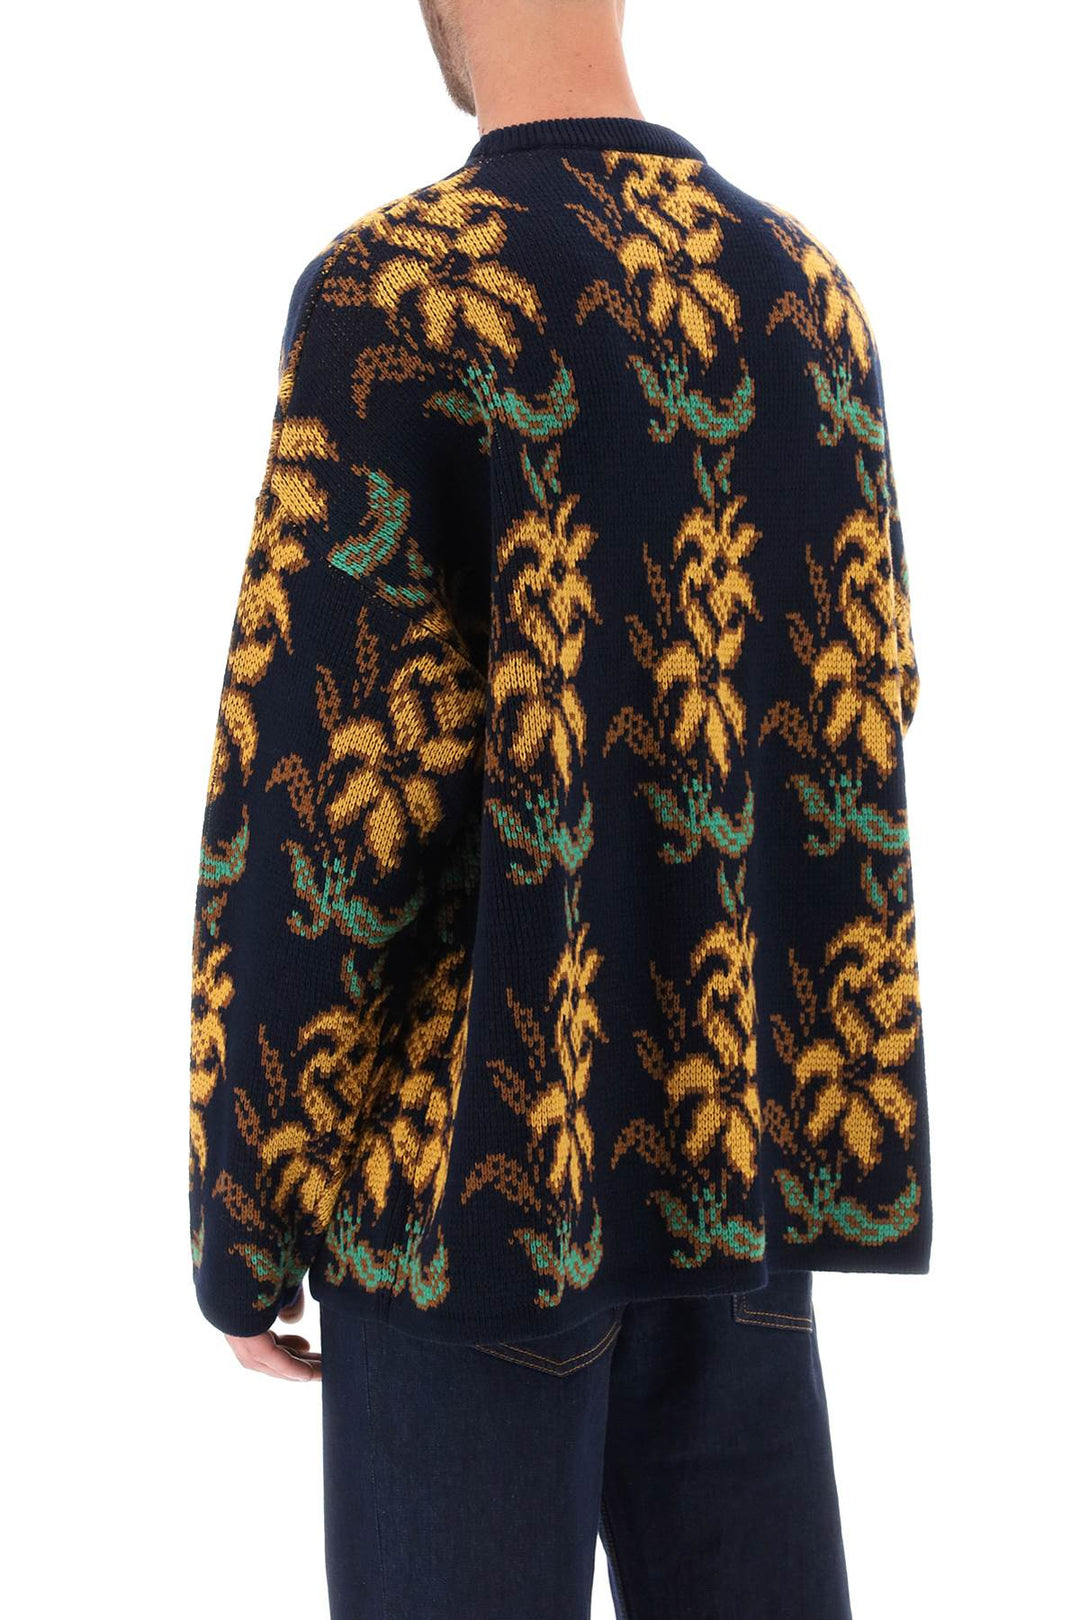 Etro Sweater With Floral Pattern   Blu